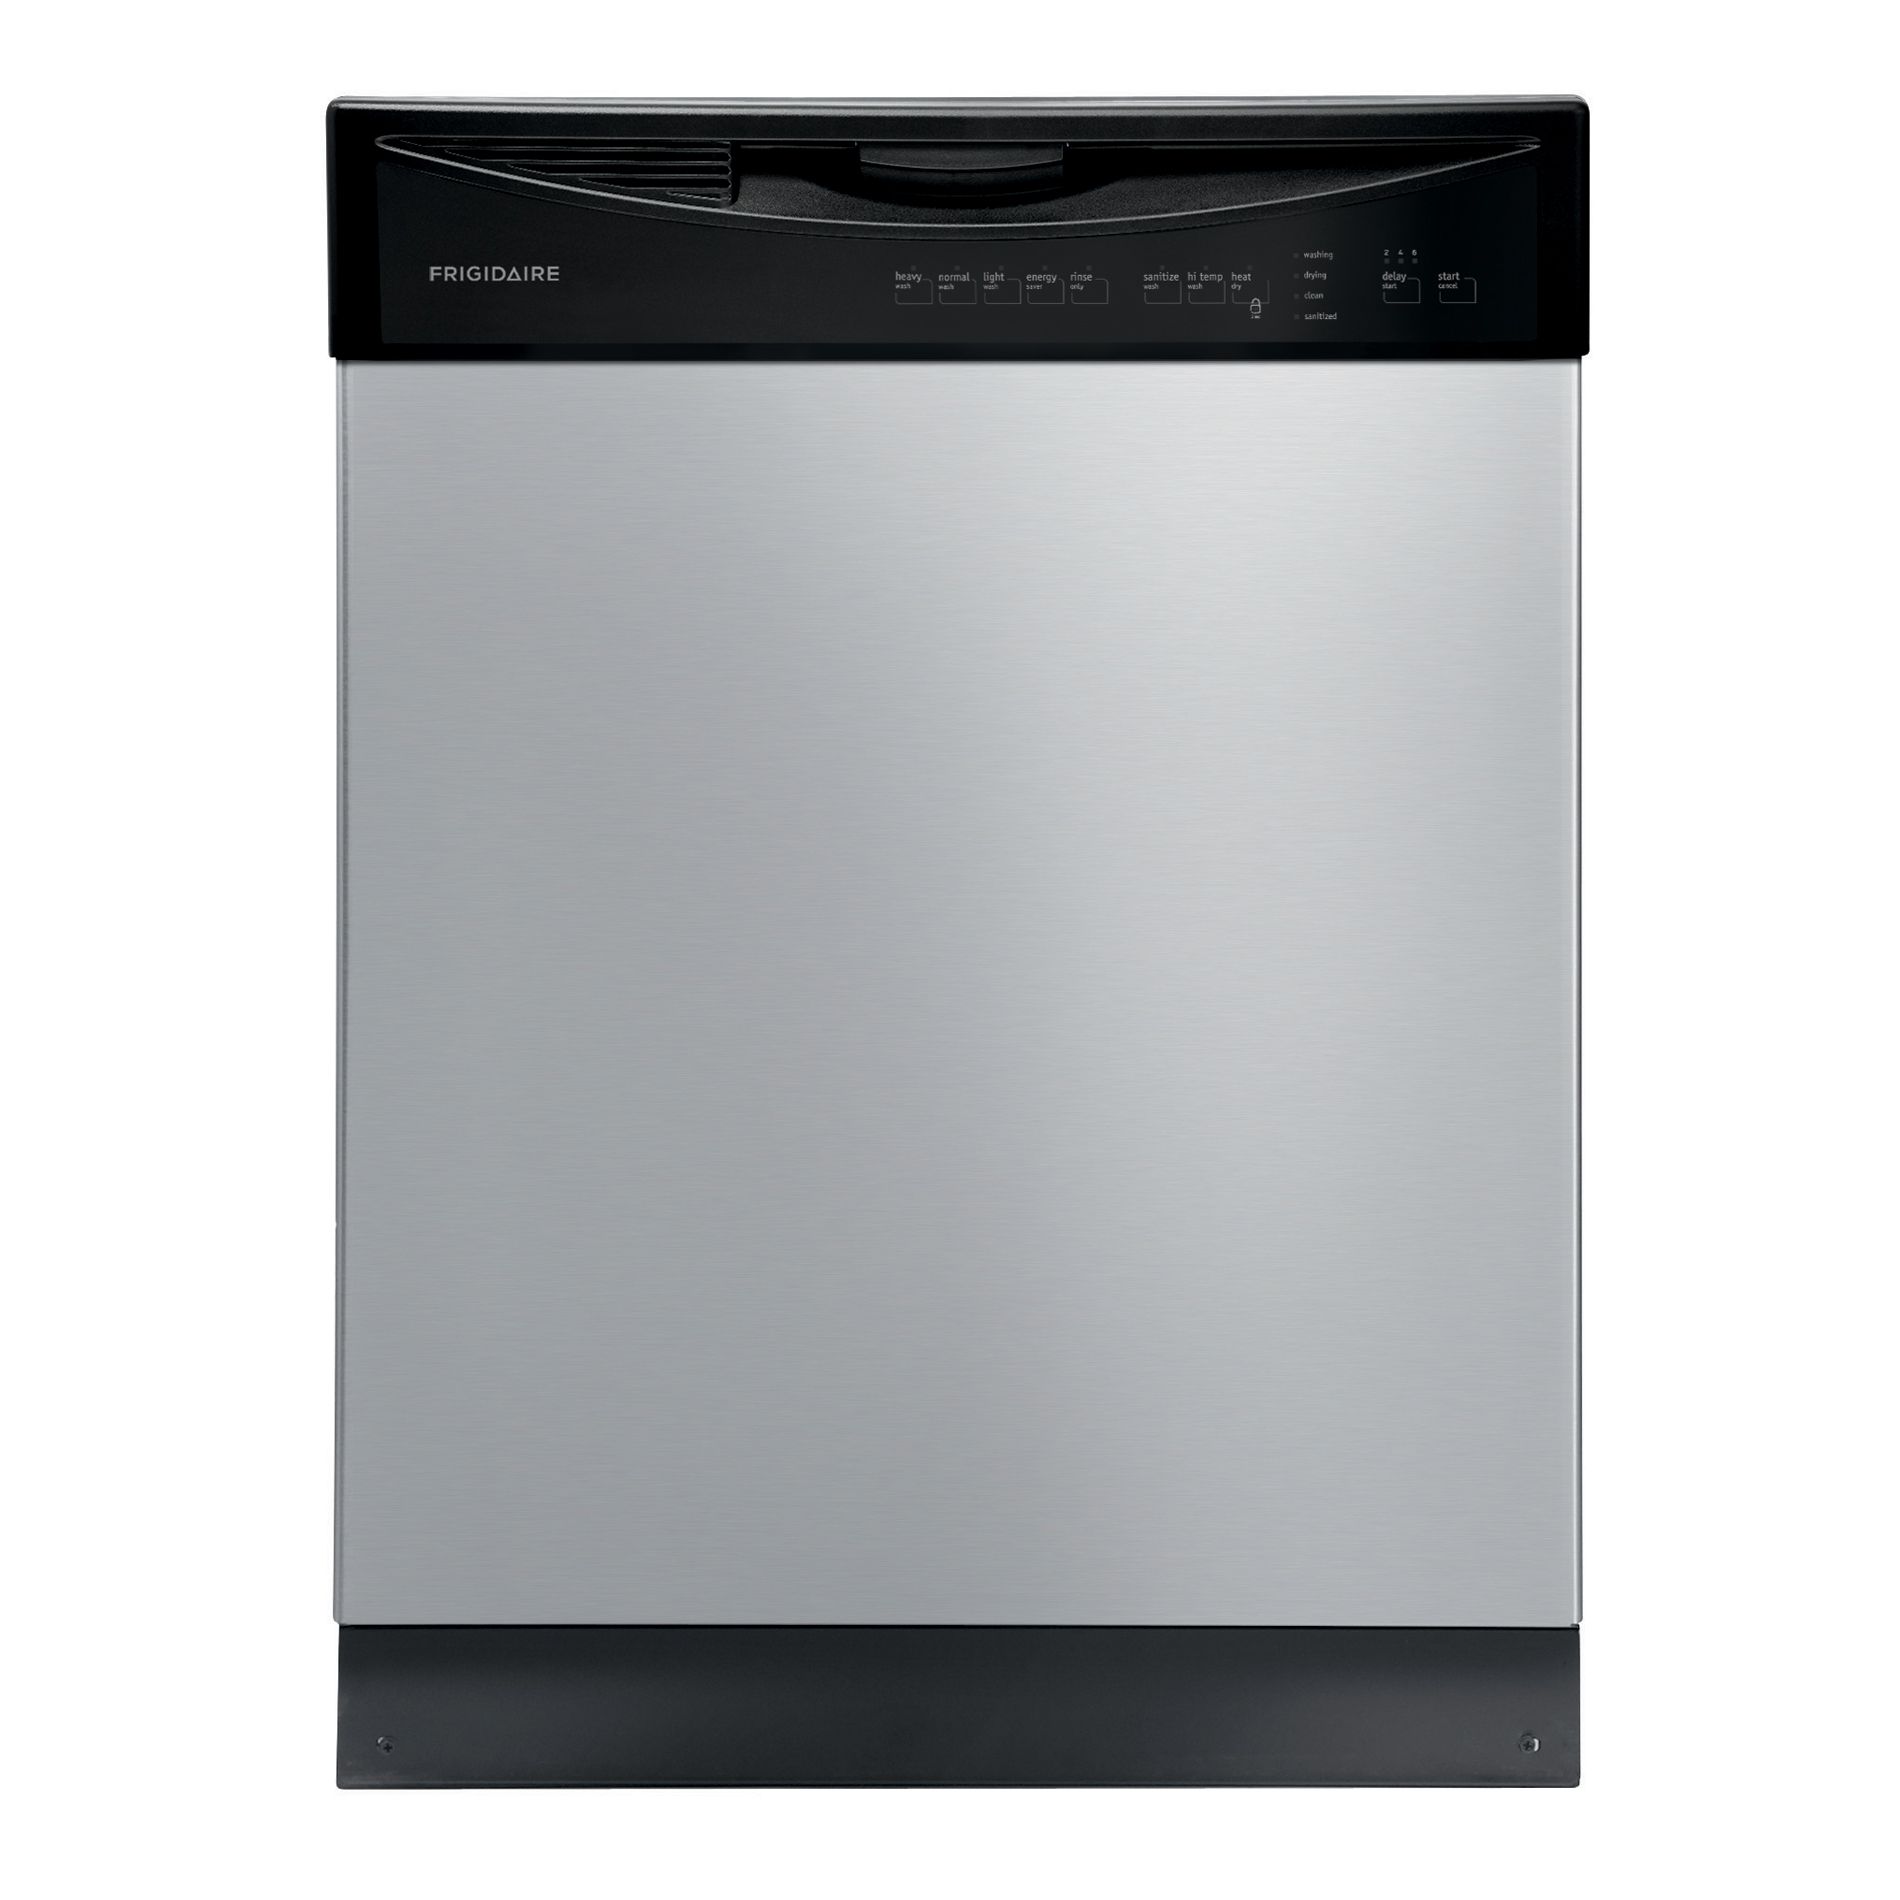 Frigidaire 24" Stainless Steel Built-In Dishwasher—Sears Frigidaire 24 Stainless Steel Dishwasher